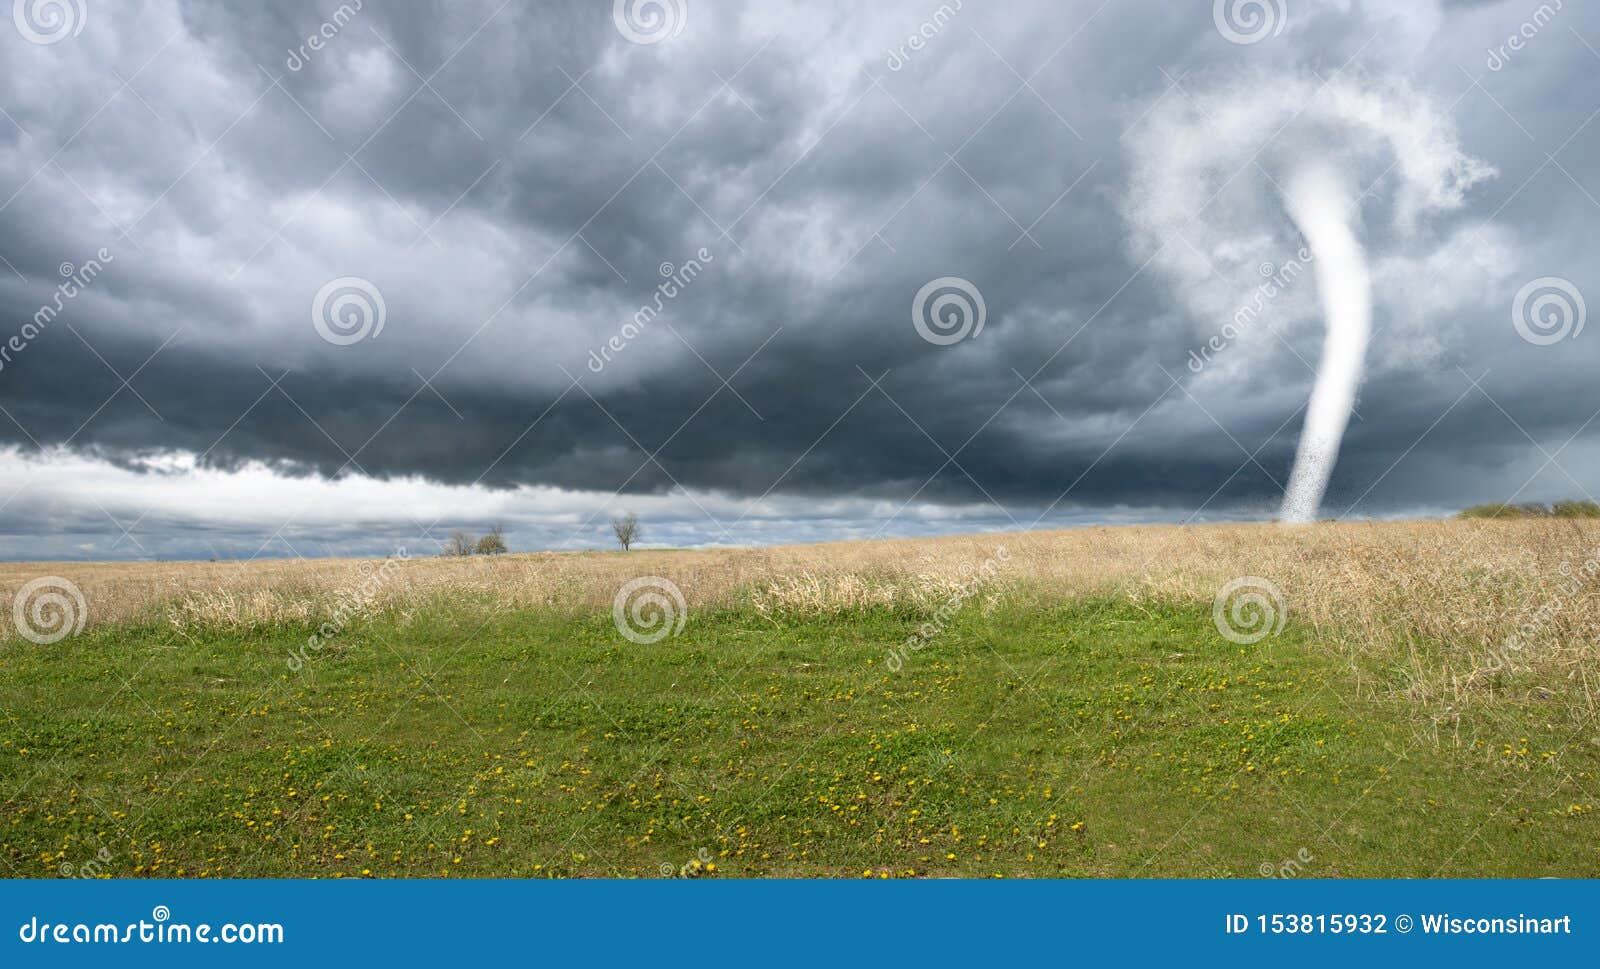 144 985 Rain Clouds Photos Free Royalty Free Stock Photos From Dreamstime